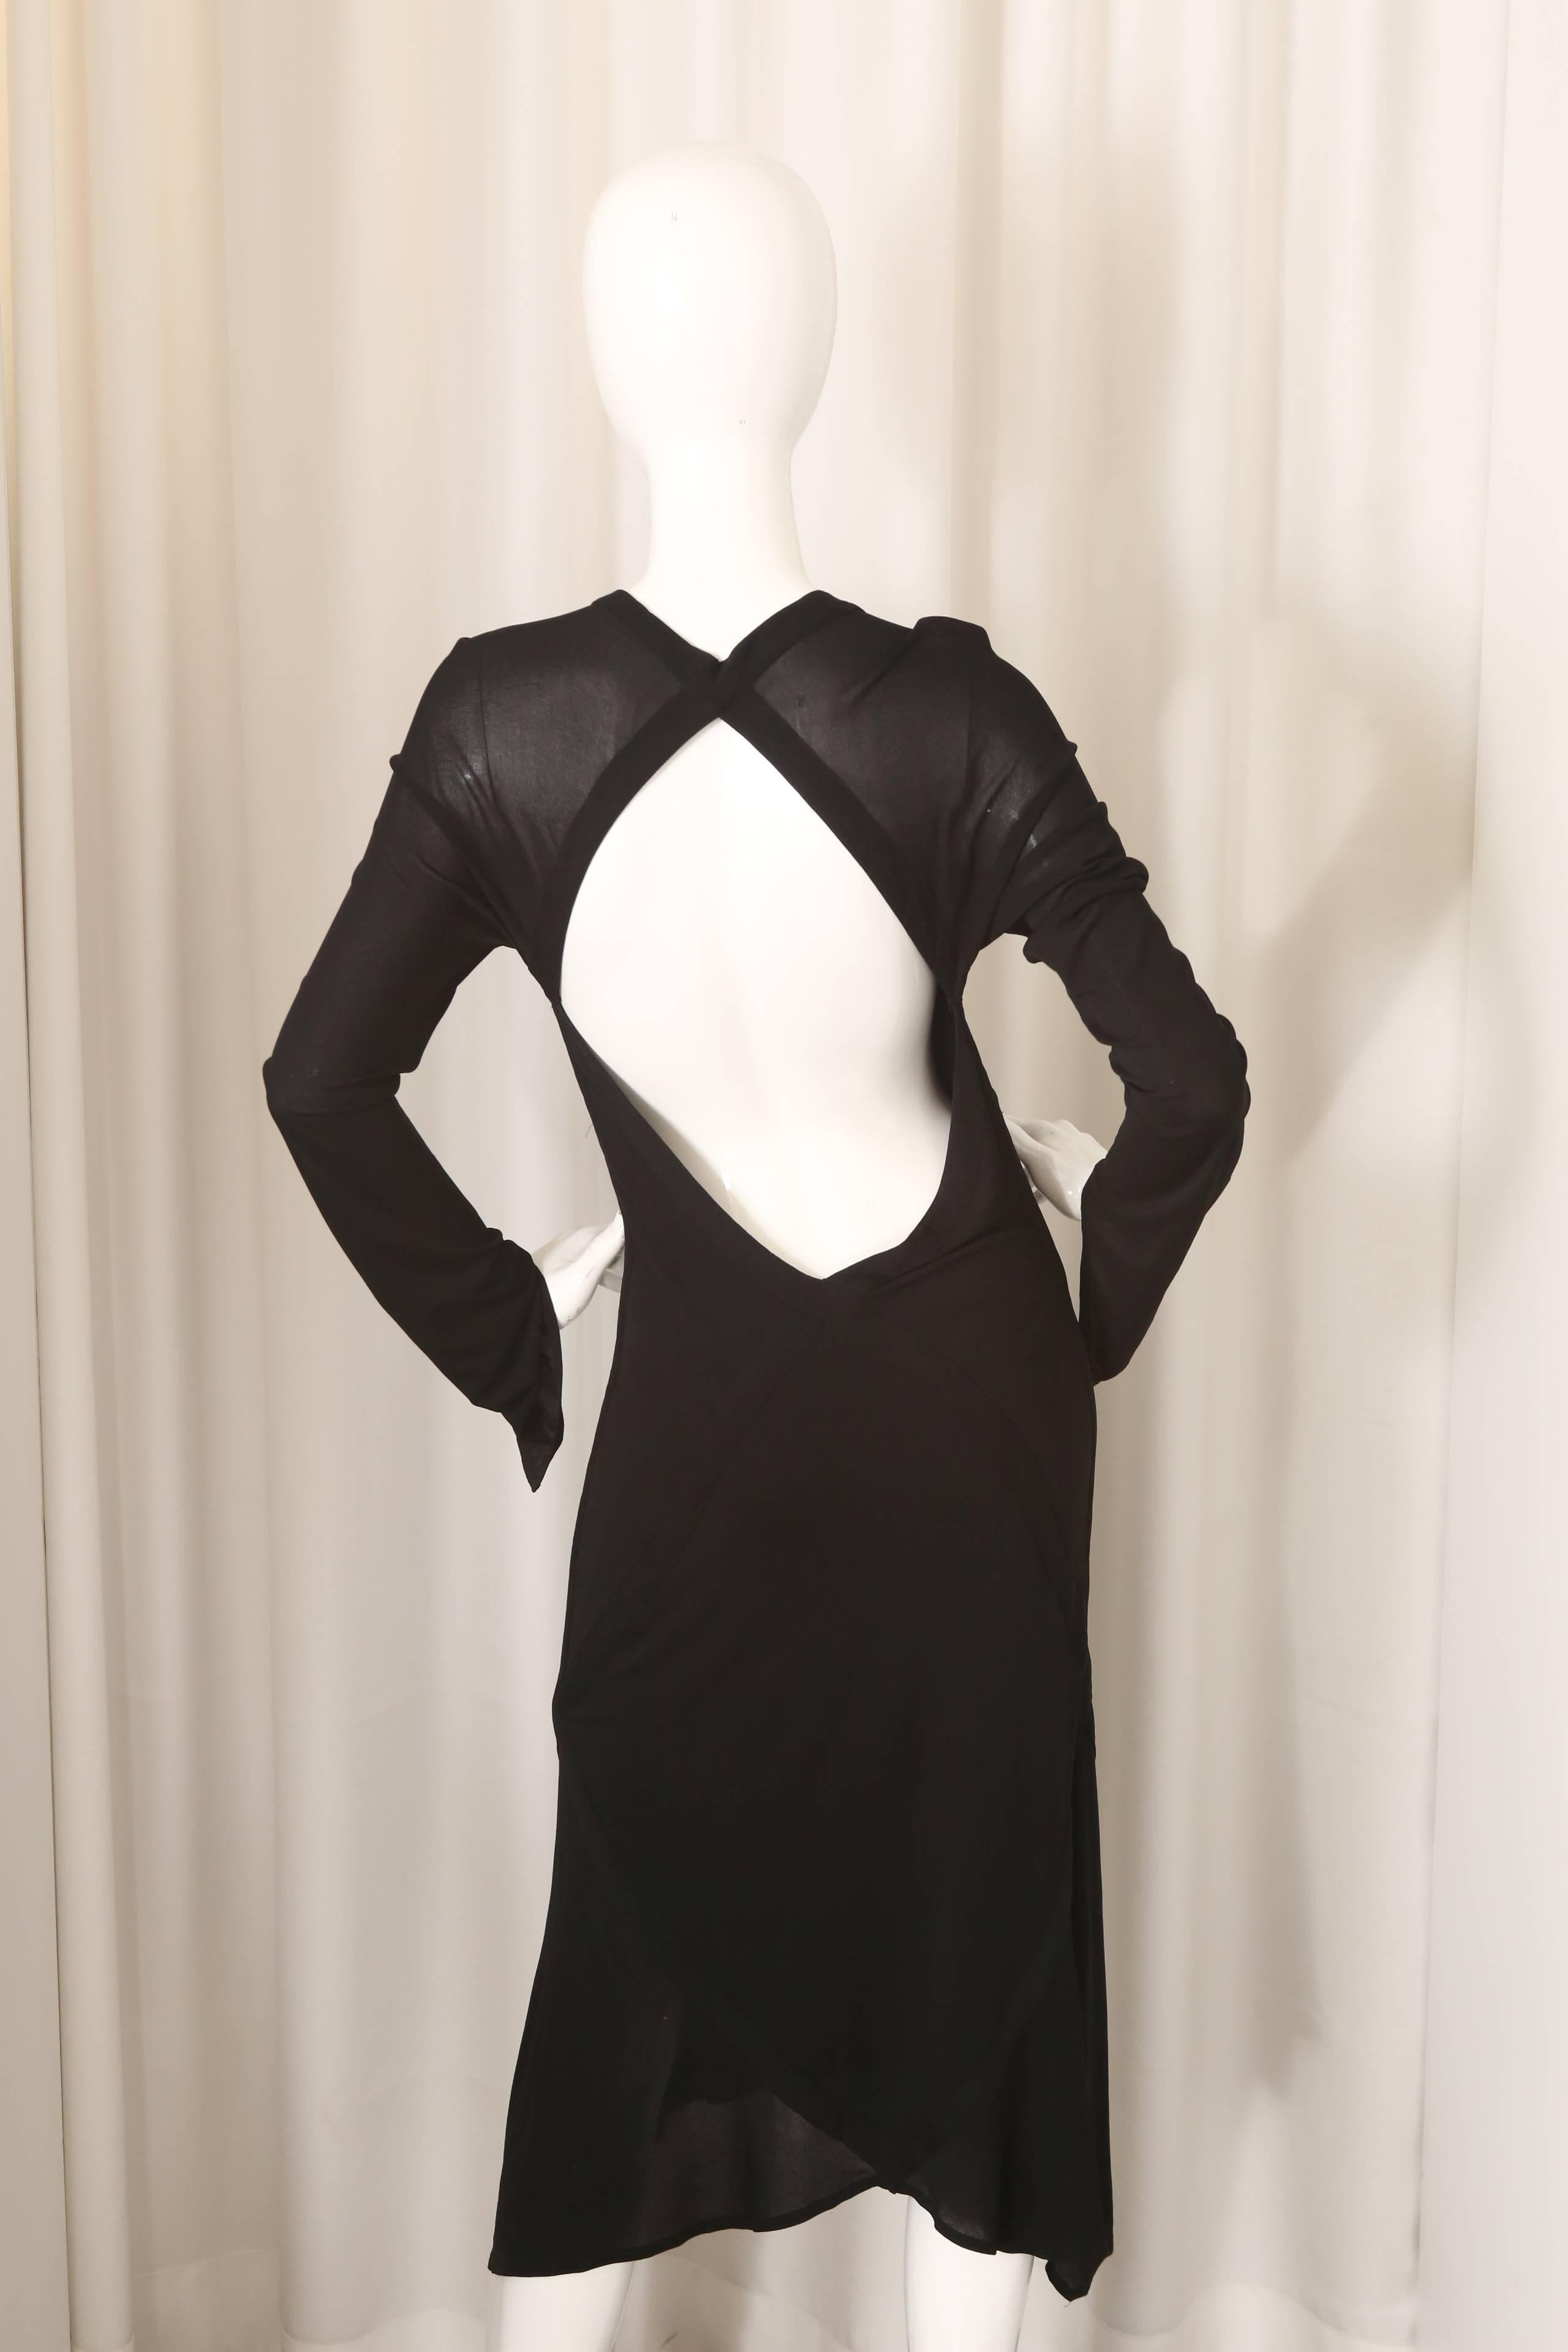 YSL Black Dress W/ Bell Sleeves and Open Back  1